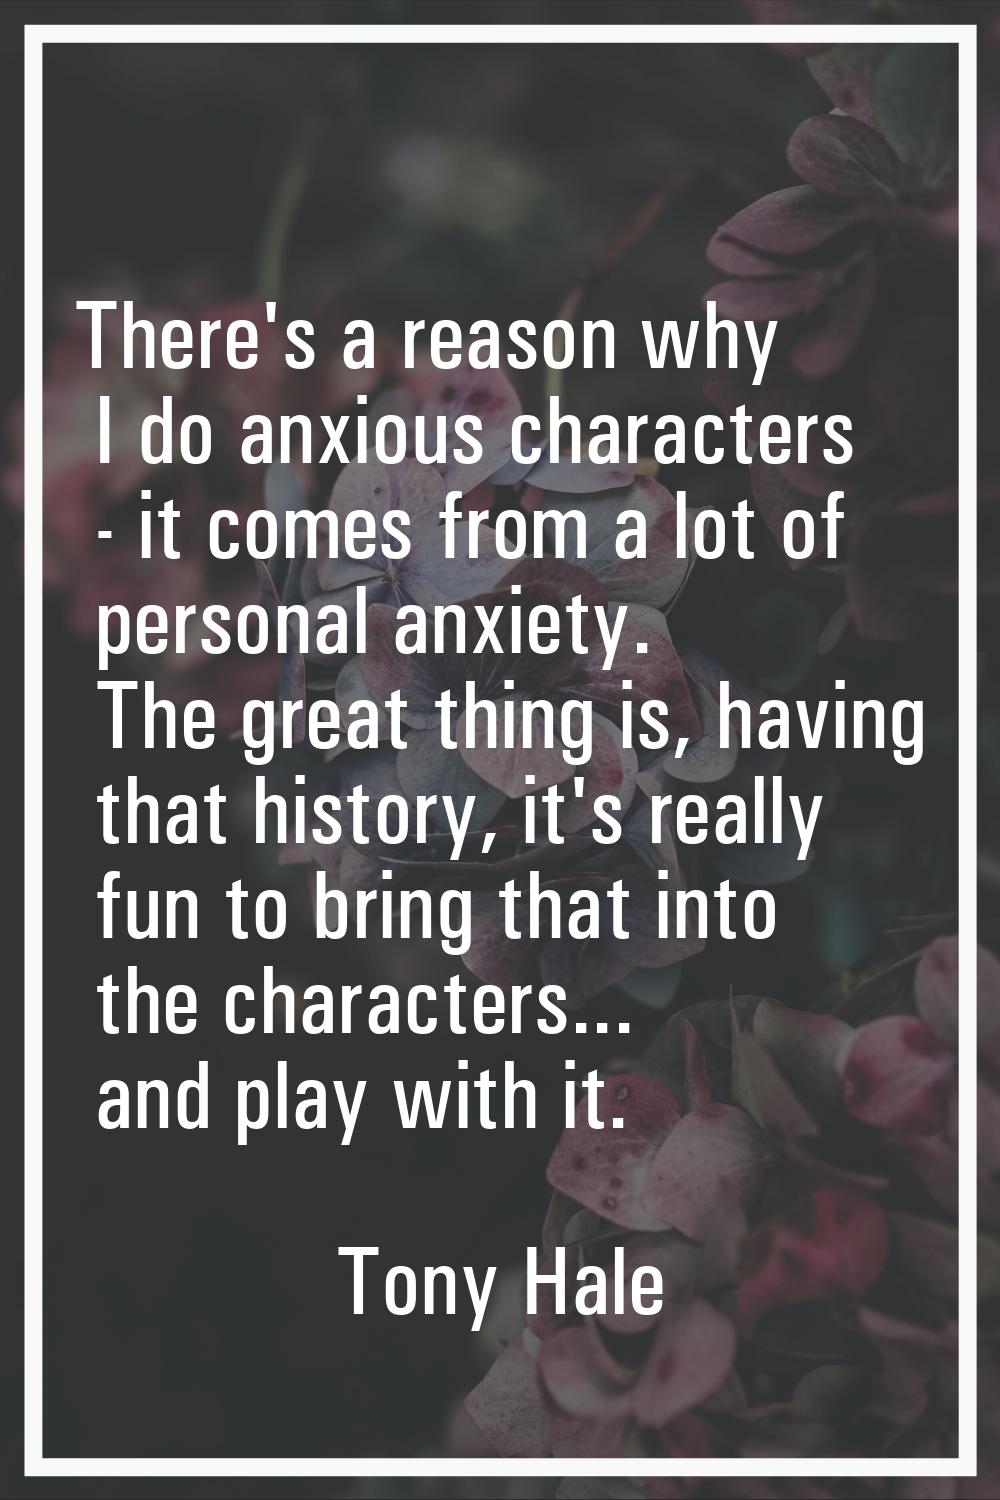 There's a reason why I do anxious characters - it comes from a lot of personal anxiety. The great t